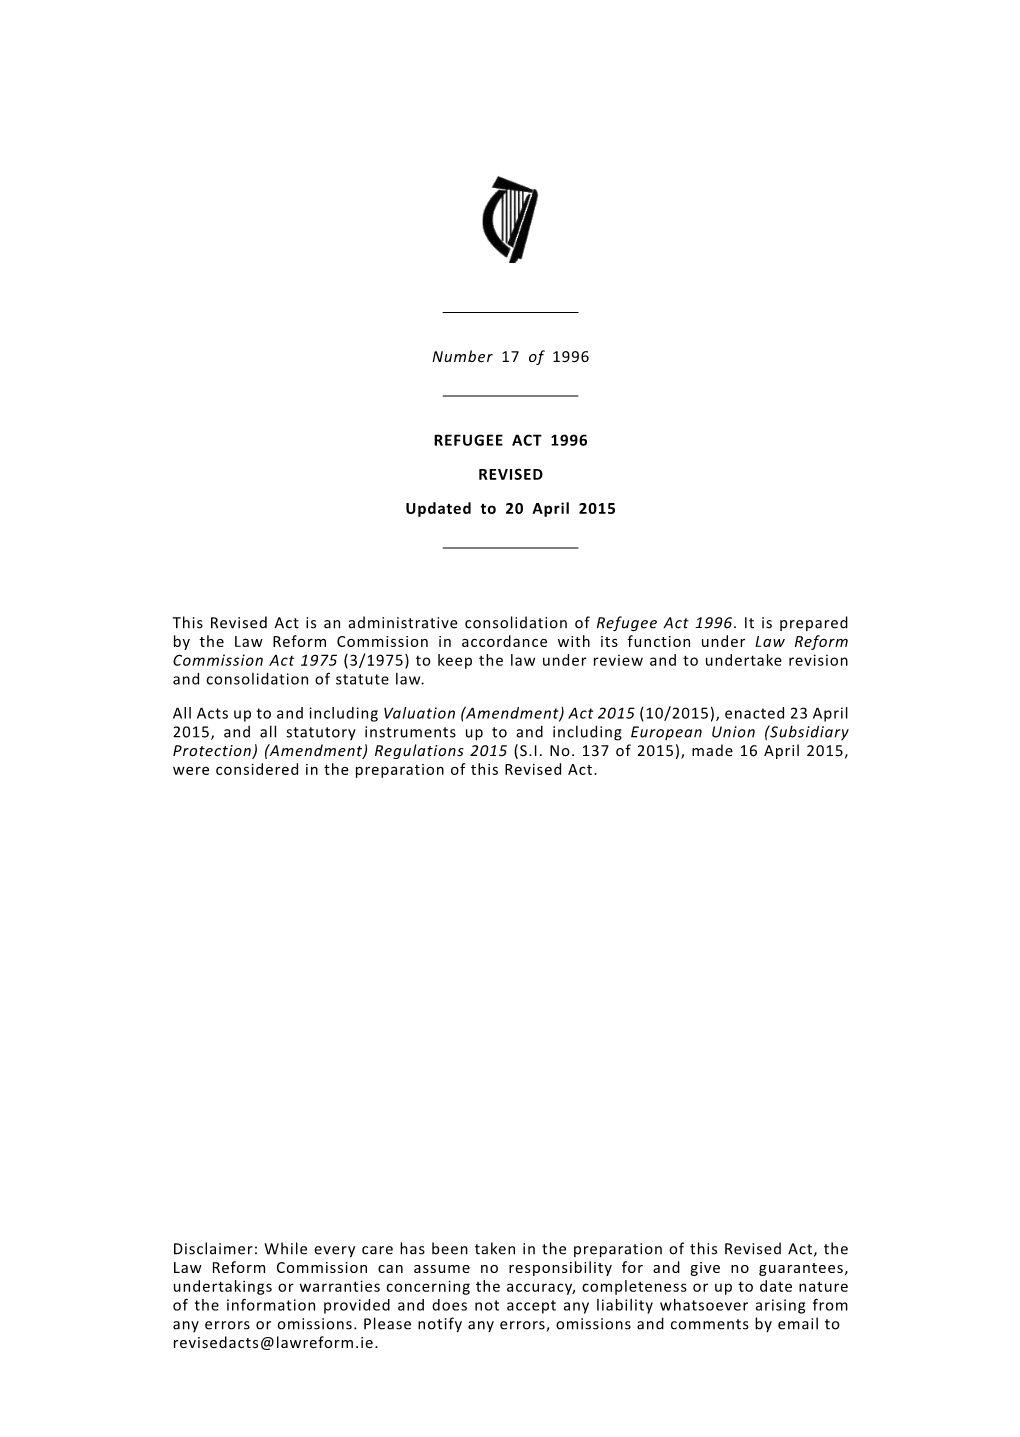 REFUGEE ACT 1996 REVISED Updated to 20 April 2015